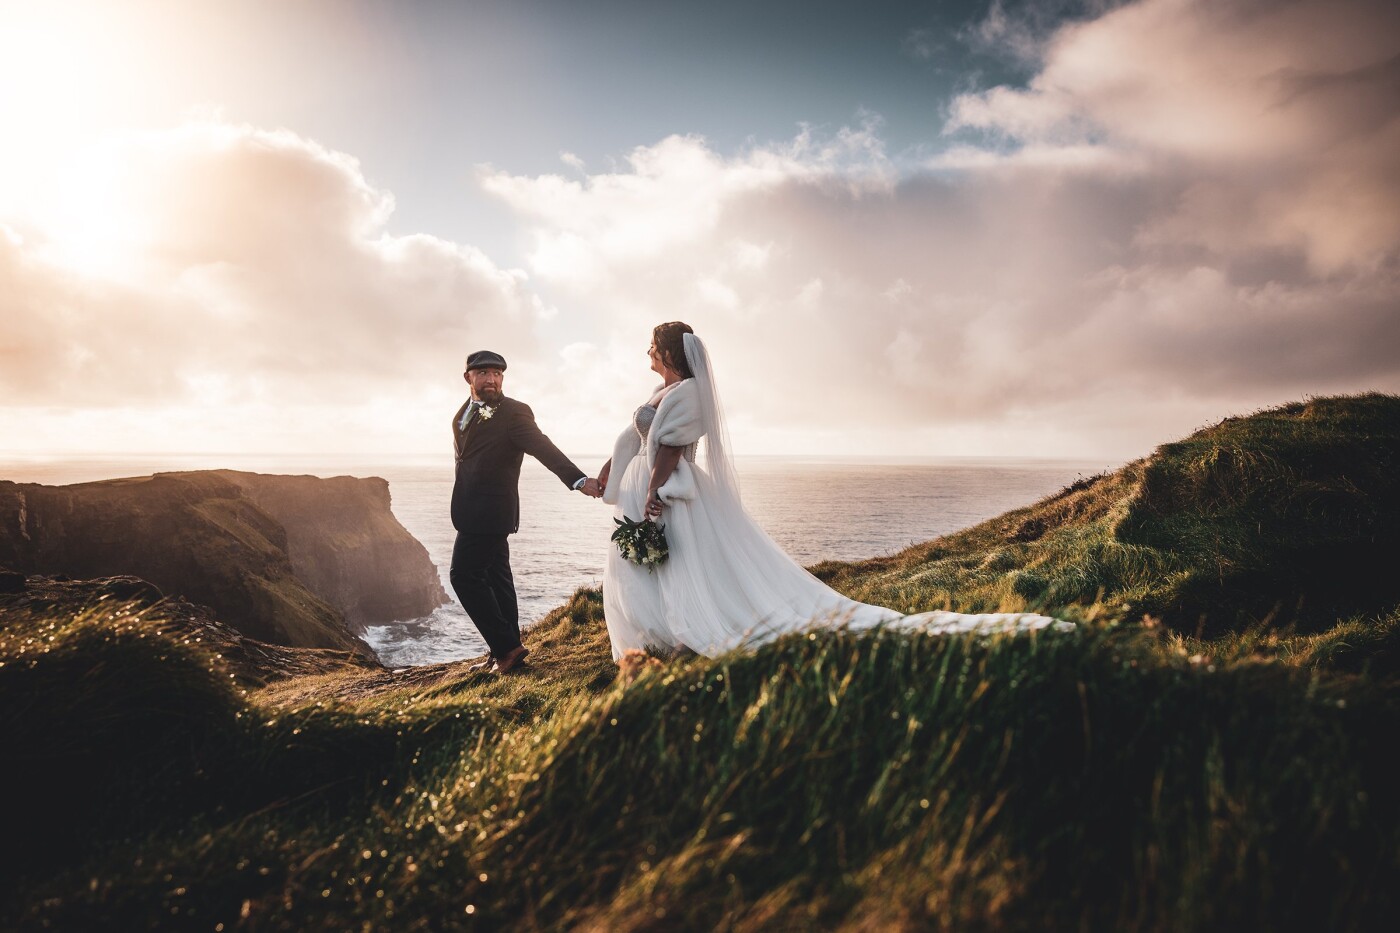 Emma & Ryan's wonderful Winter Elopement at the Cliffs of Moher, Ireland.
This is how beautiful a l...